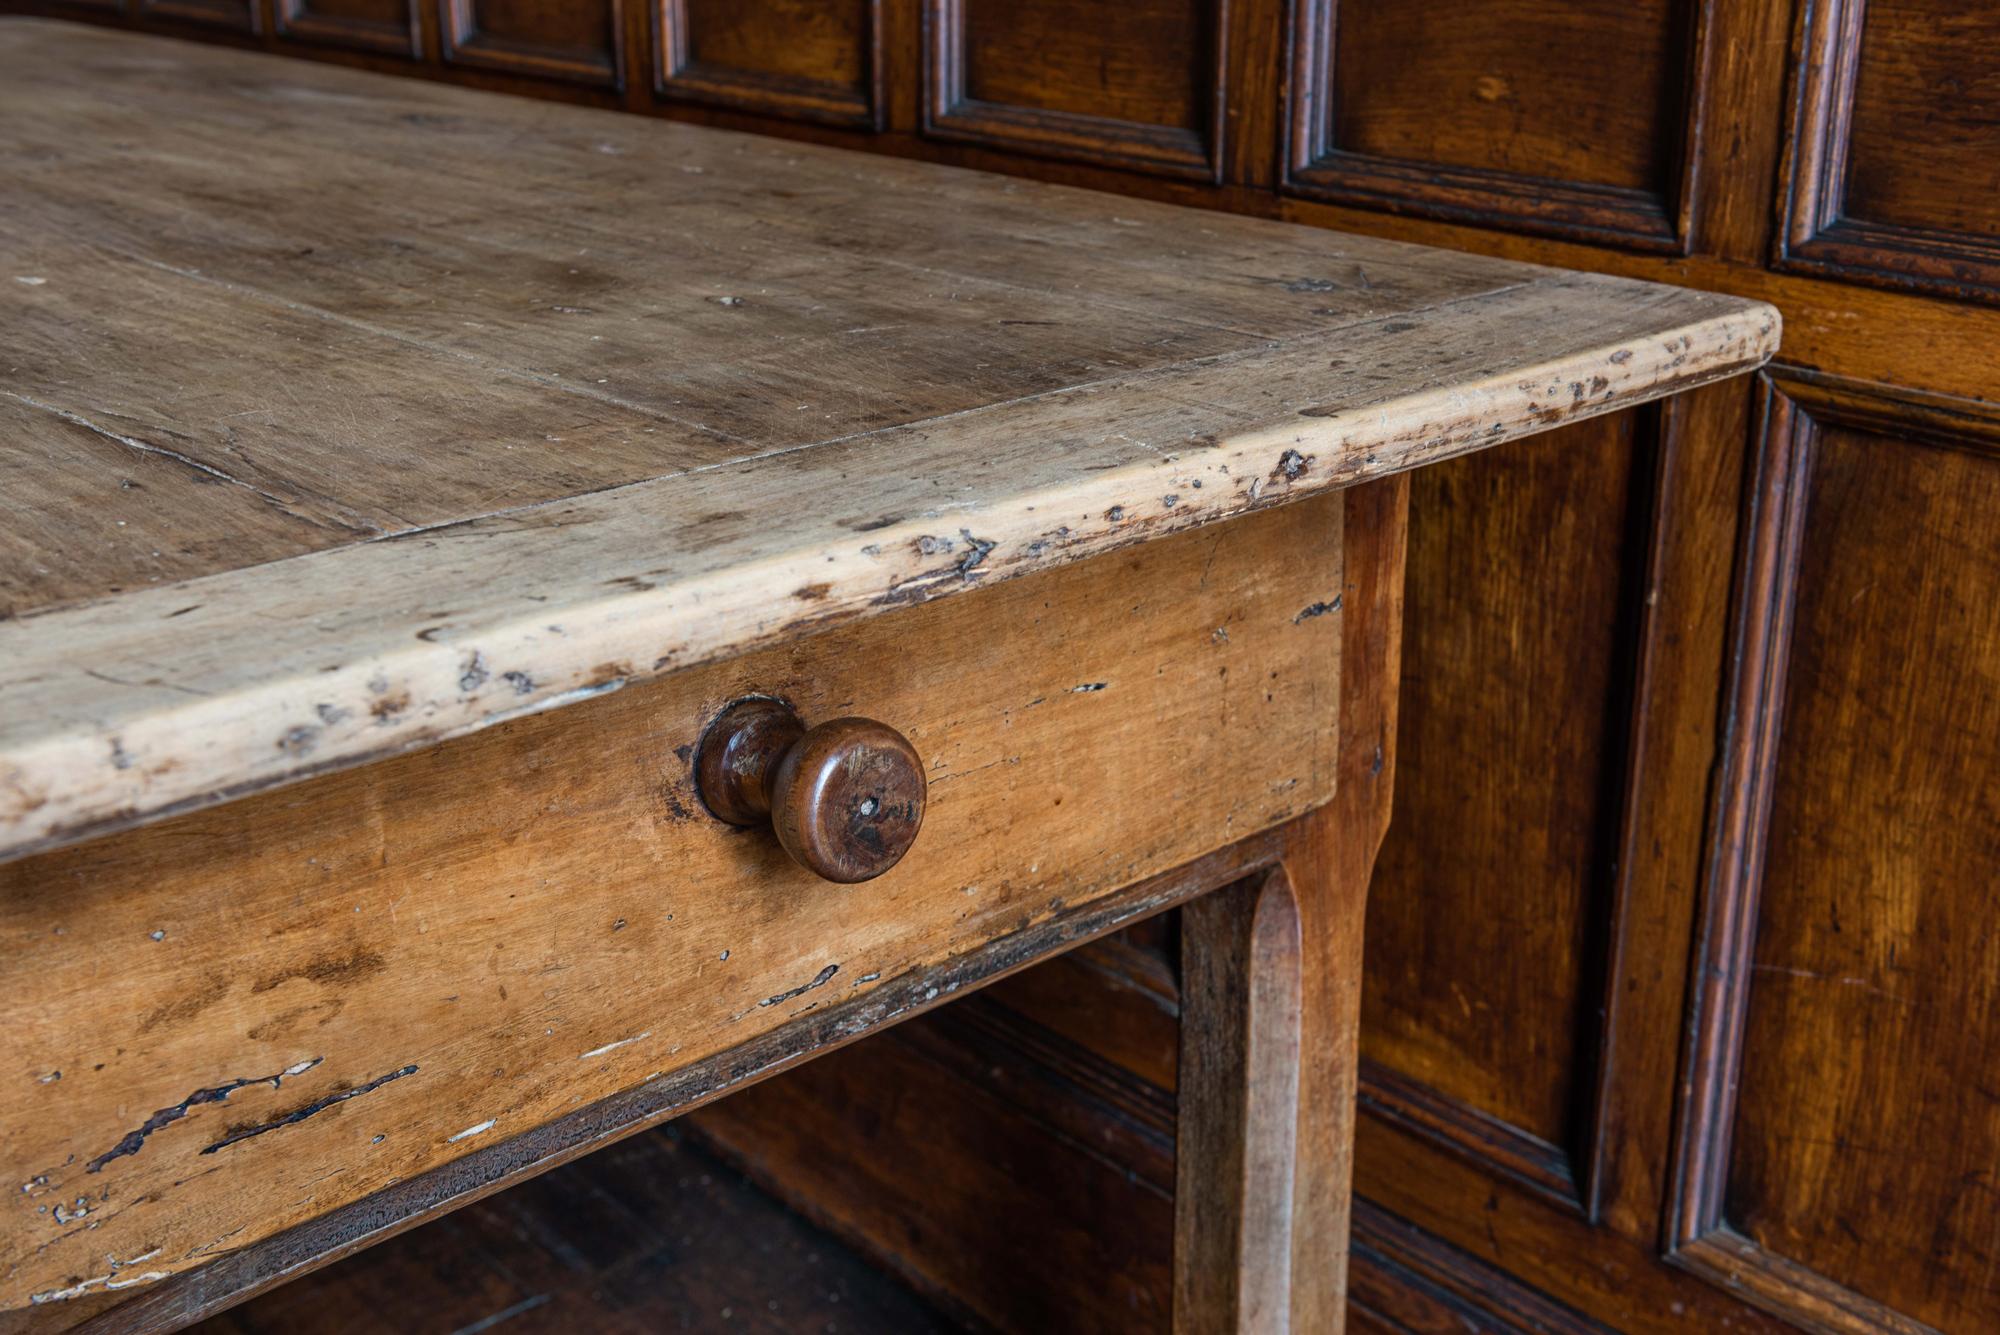 Early 19th century provincial French Elm farmhouse table with two end drawers
sourced from the south of France, this rustic farmhouse table features two full length drawers - one either side. The oak cleated top a lighter contrasting color to the